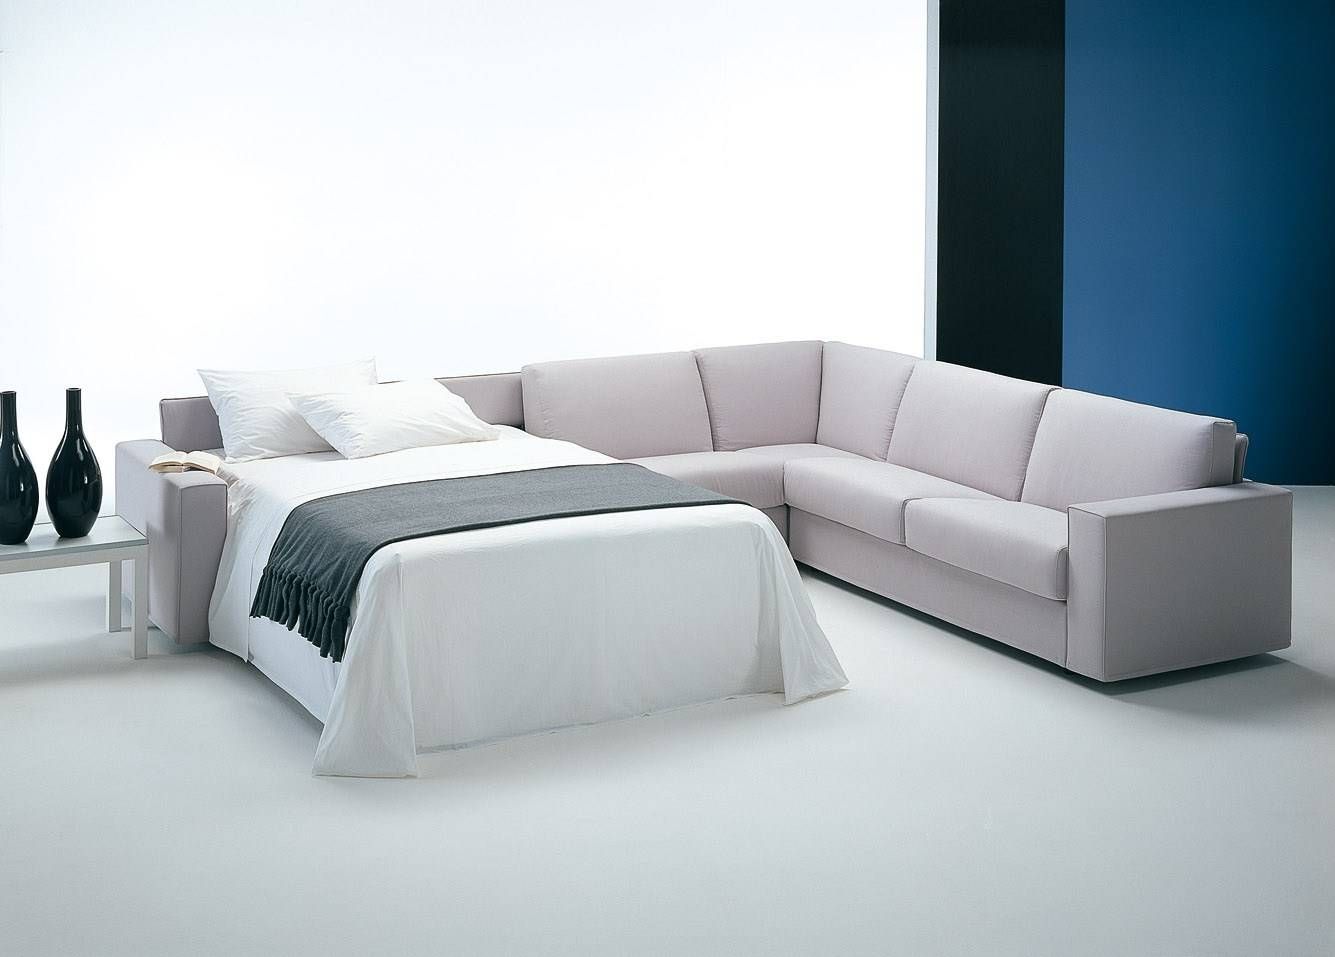 giant size sofa bed